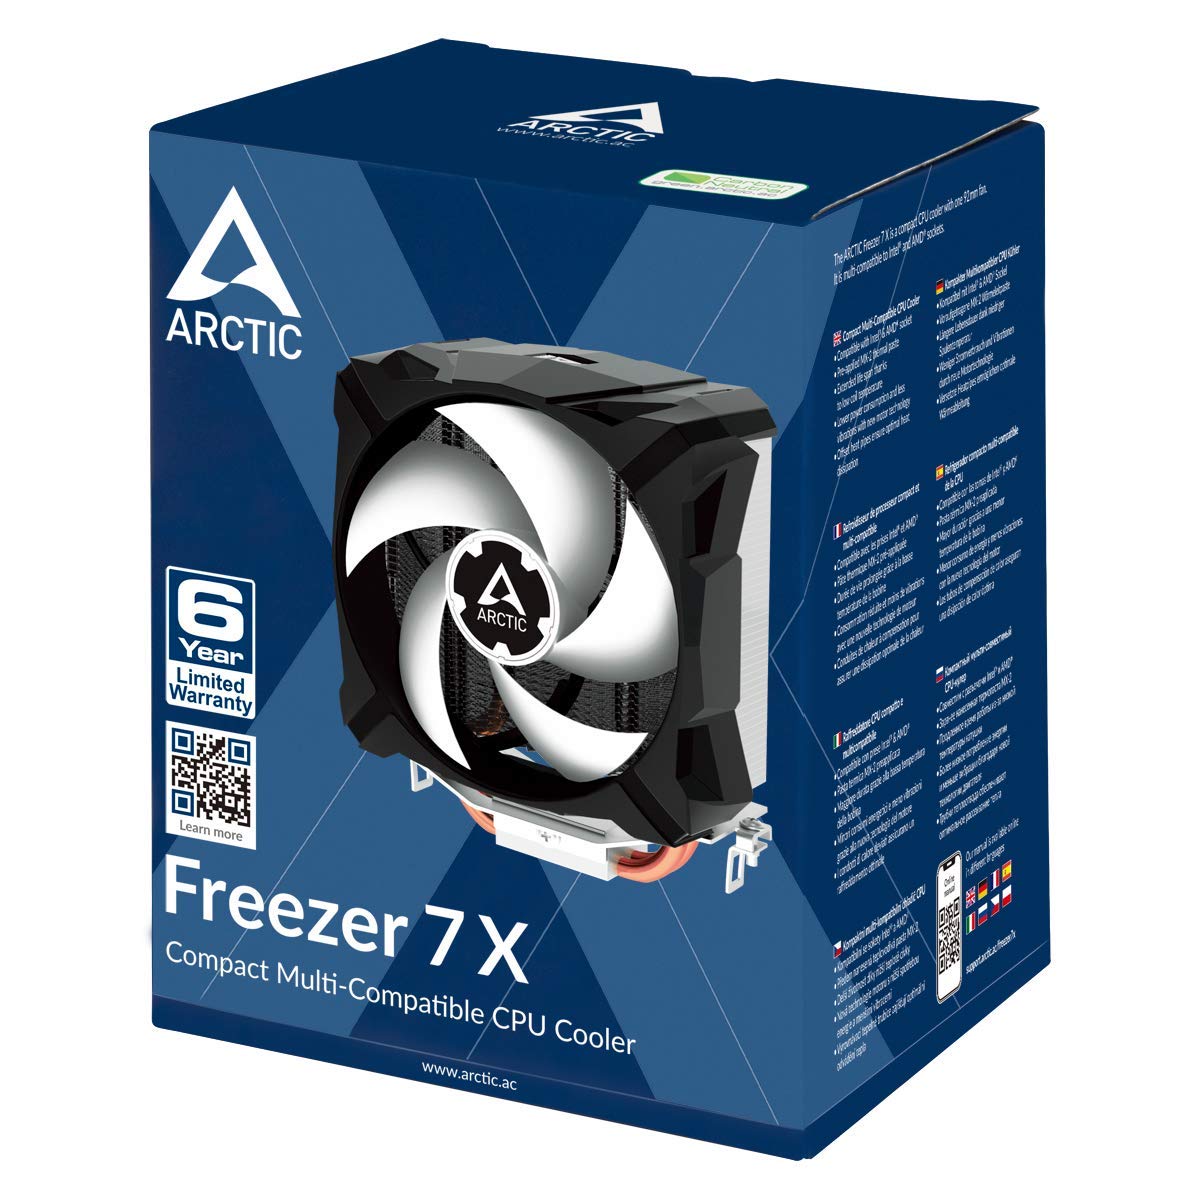 ARCTIC Freezer 7 X - Compact Multi-Compatible CPU Fan, 100 mm PWM CPU Air Cooler, Compatible with Intel & AMD Sockets, Intel LGA 1700, 300-2000 RPM (PWM Controlled), Pre-Applied MX-4 Thermal Paste